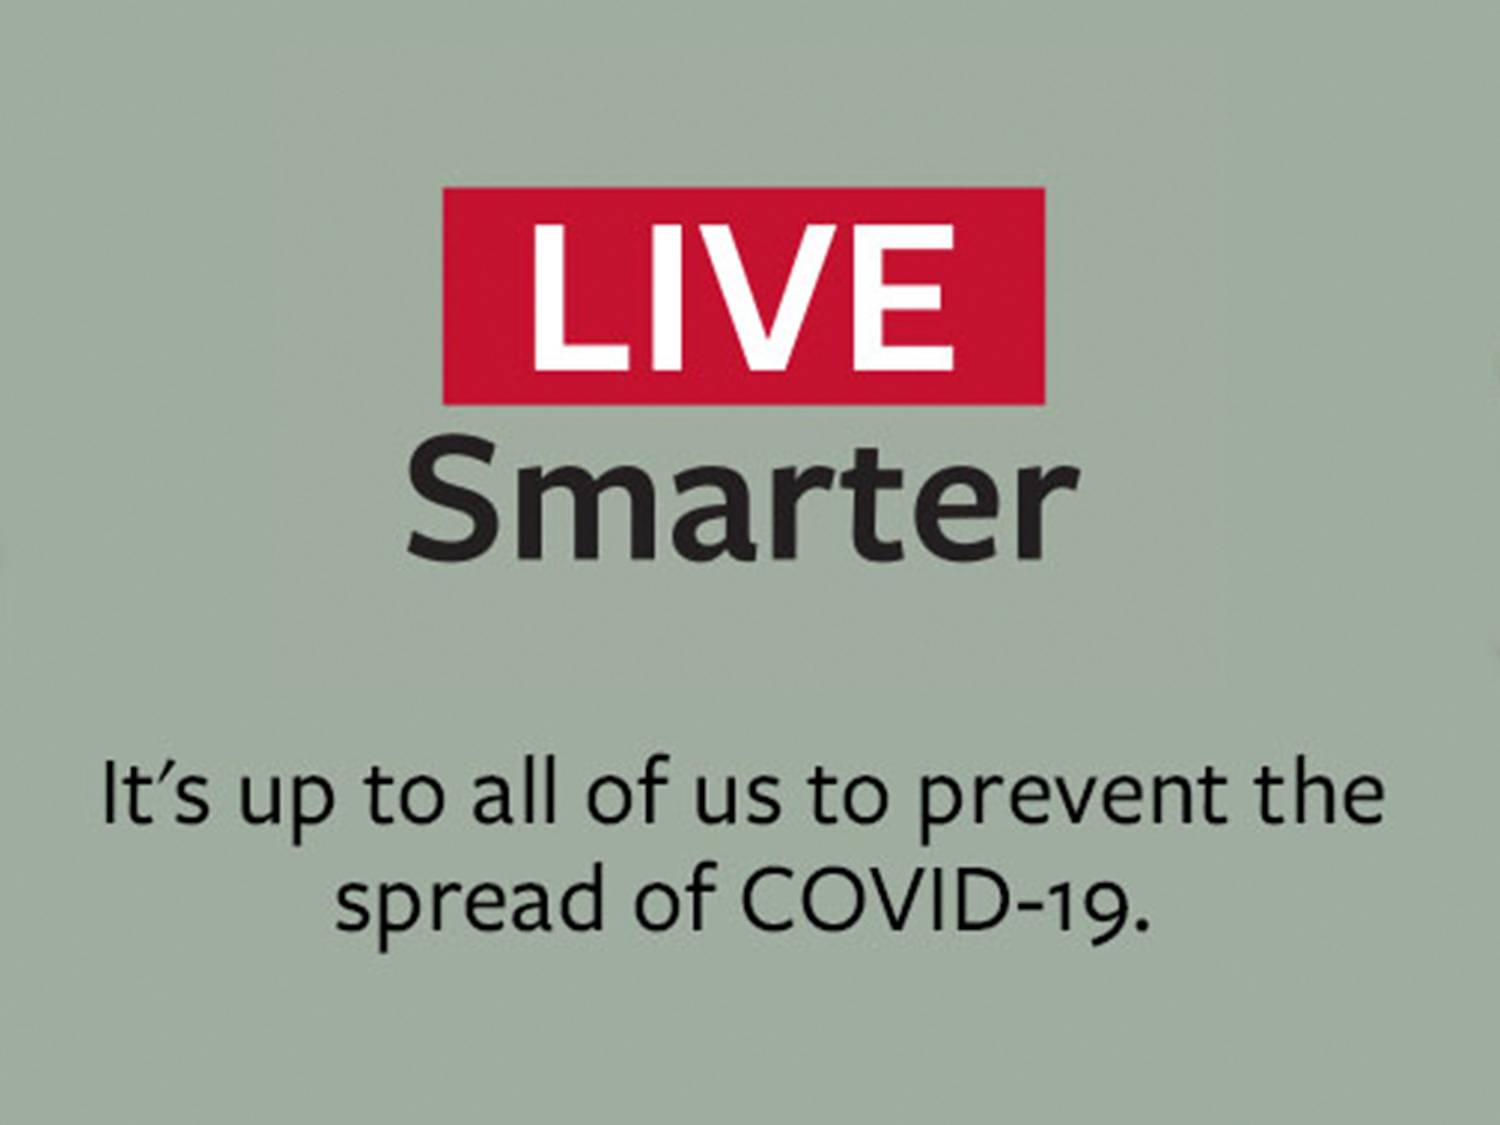 Live Smarter: It's up to all o us to prevent the spread of COVID-19.